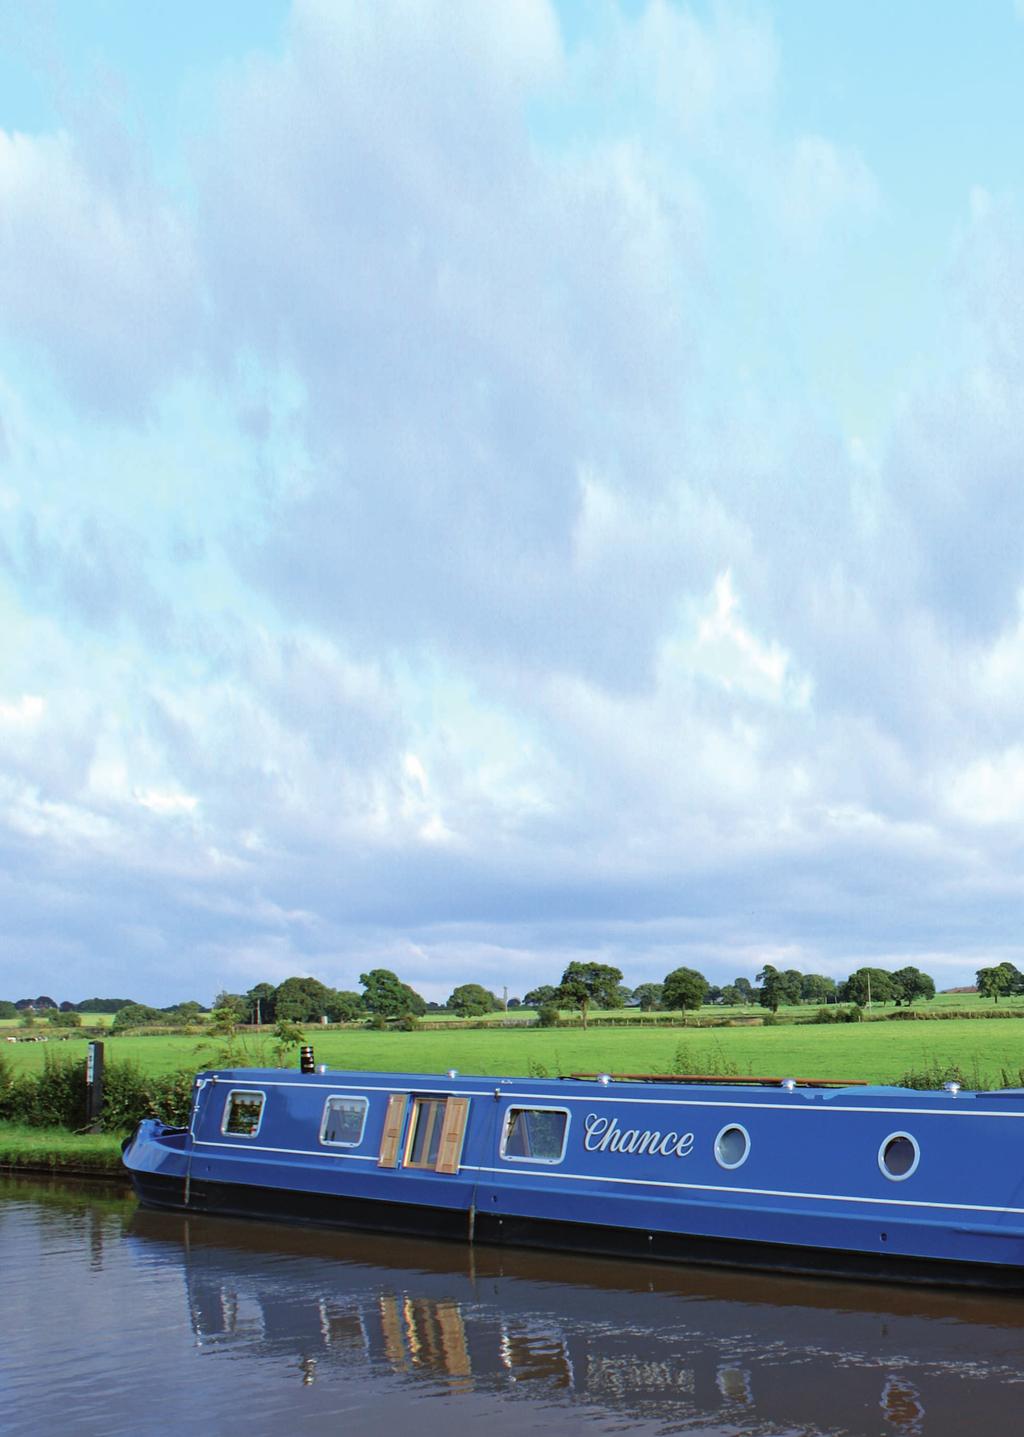 TWO of a kind? In the past five years, 58ft has become the standard narrowboat length the maximum capable of cruising pretty much anywhere, including the short locks of the Yorkshire waterways.